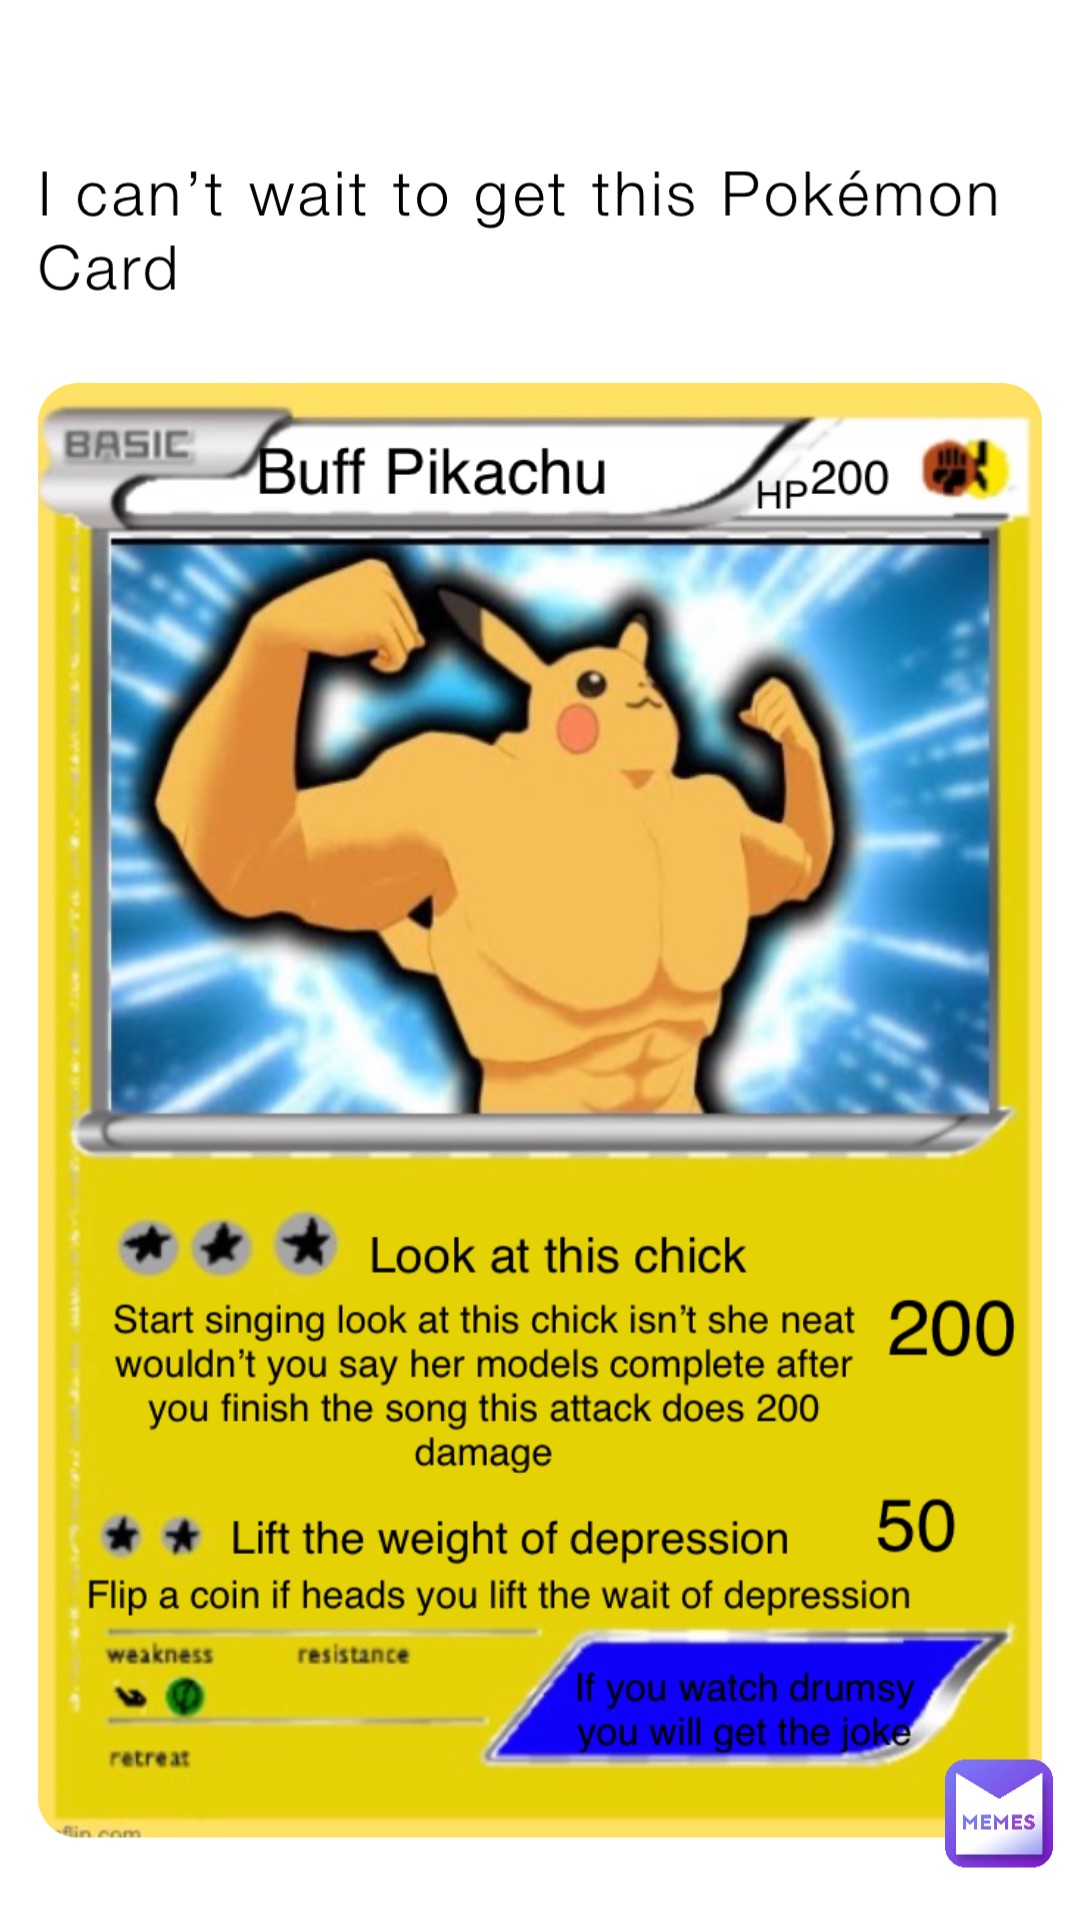 I can’t wait to get this Pokémon Card